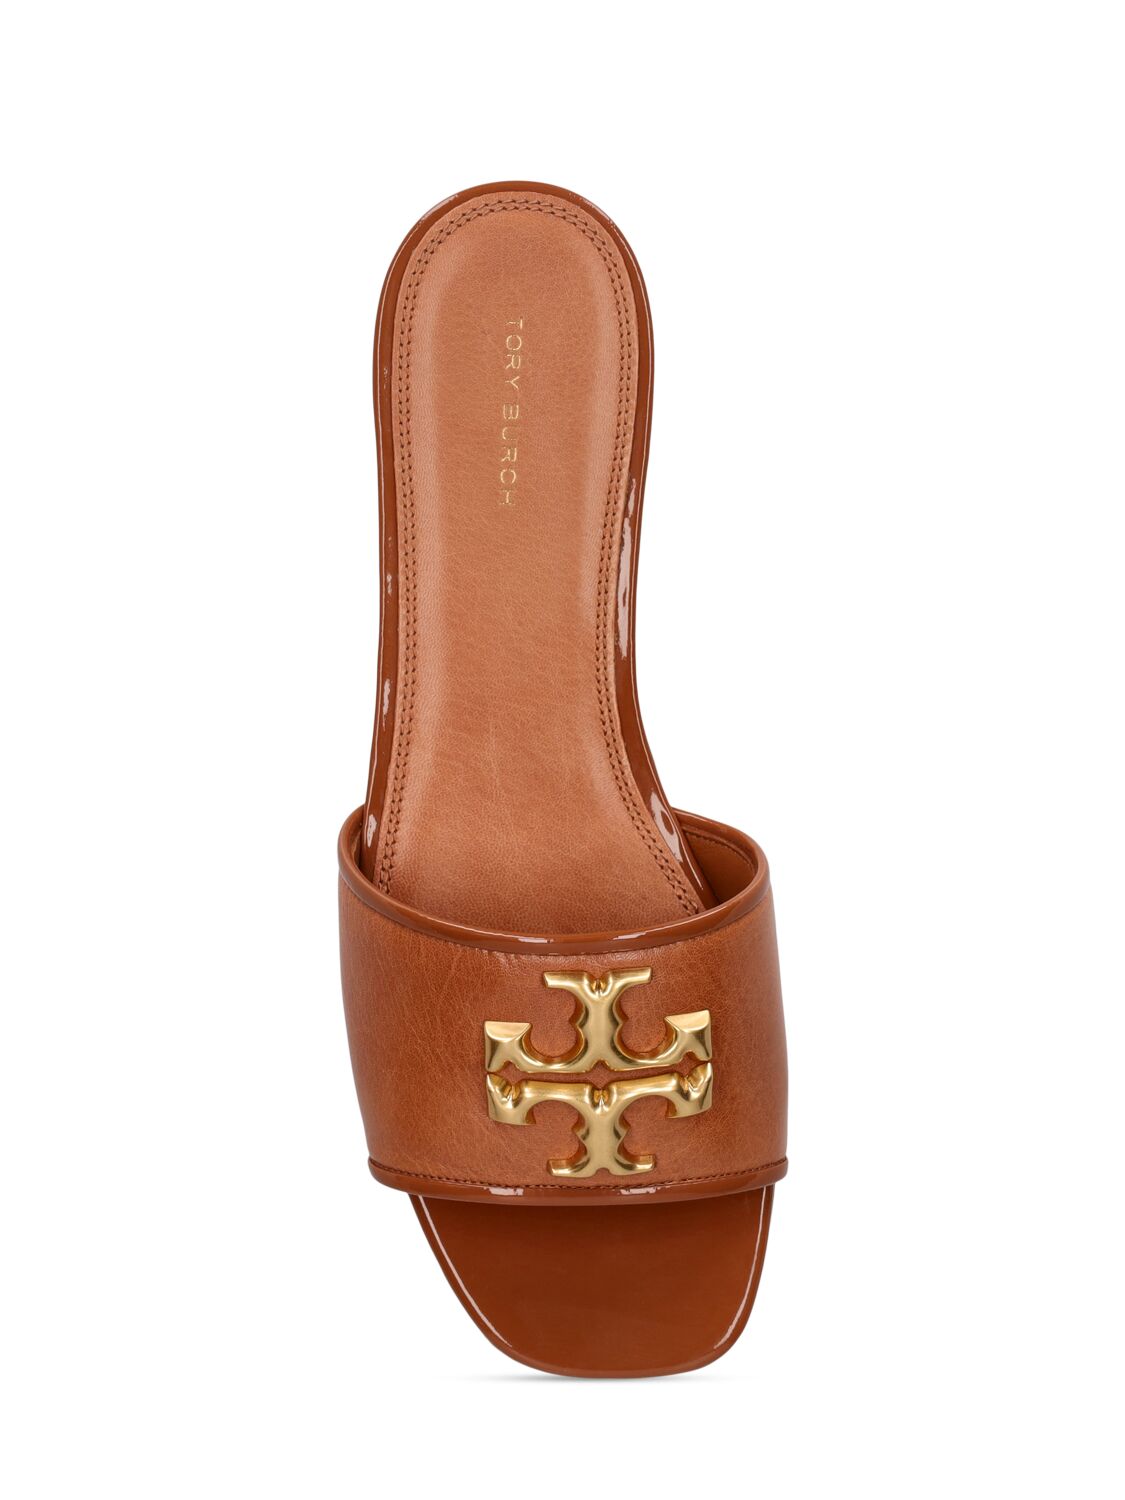 Shop Tory Burch 10mm Eleanor Leather Slide Sandals In Tan